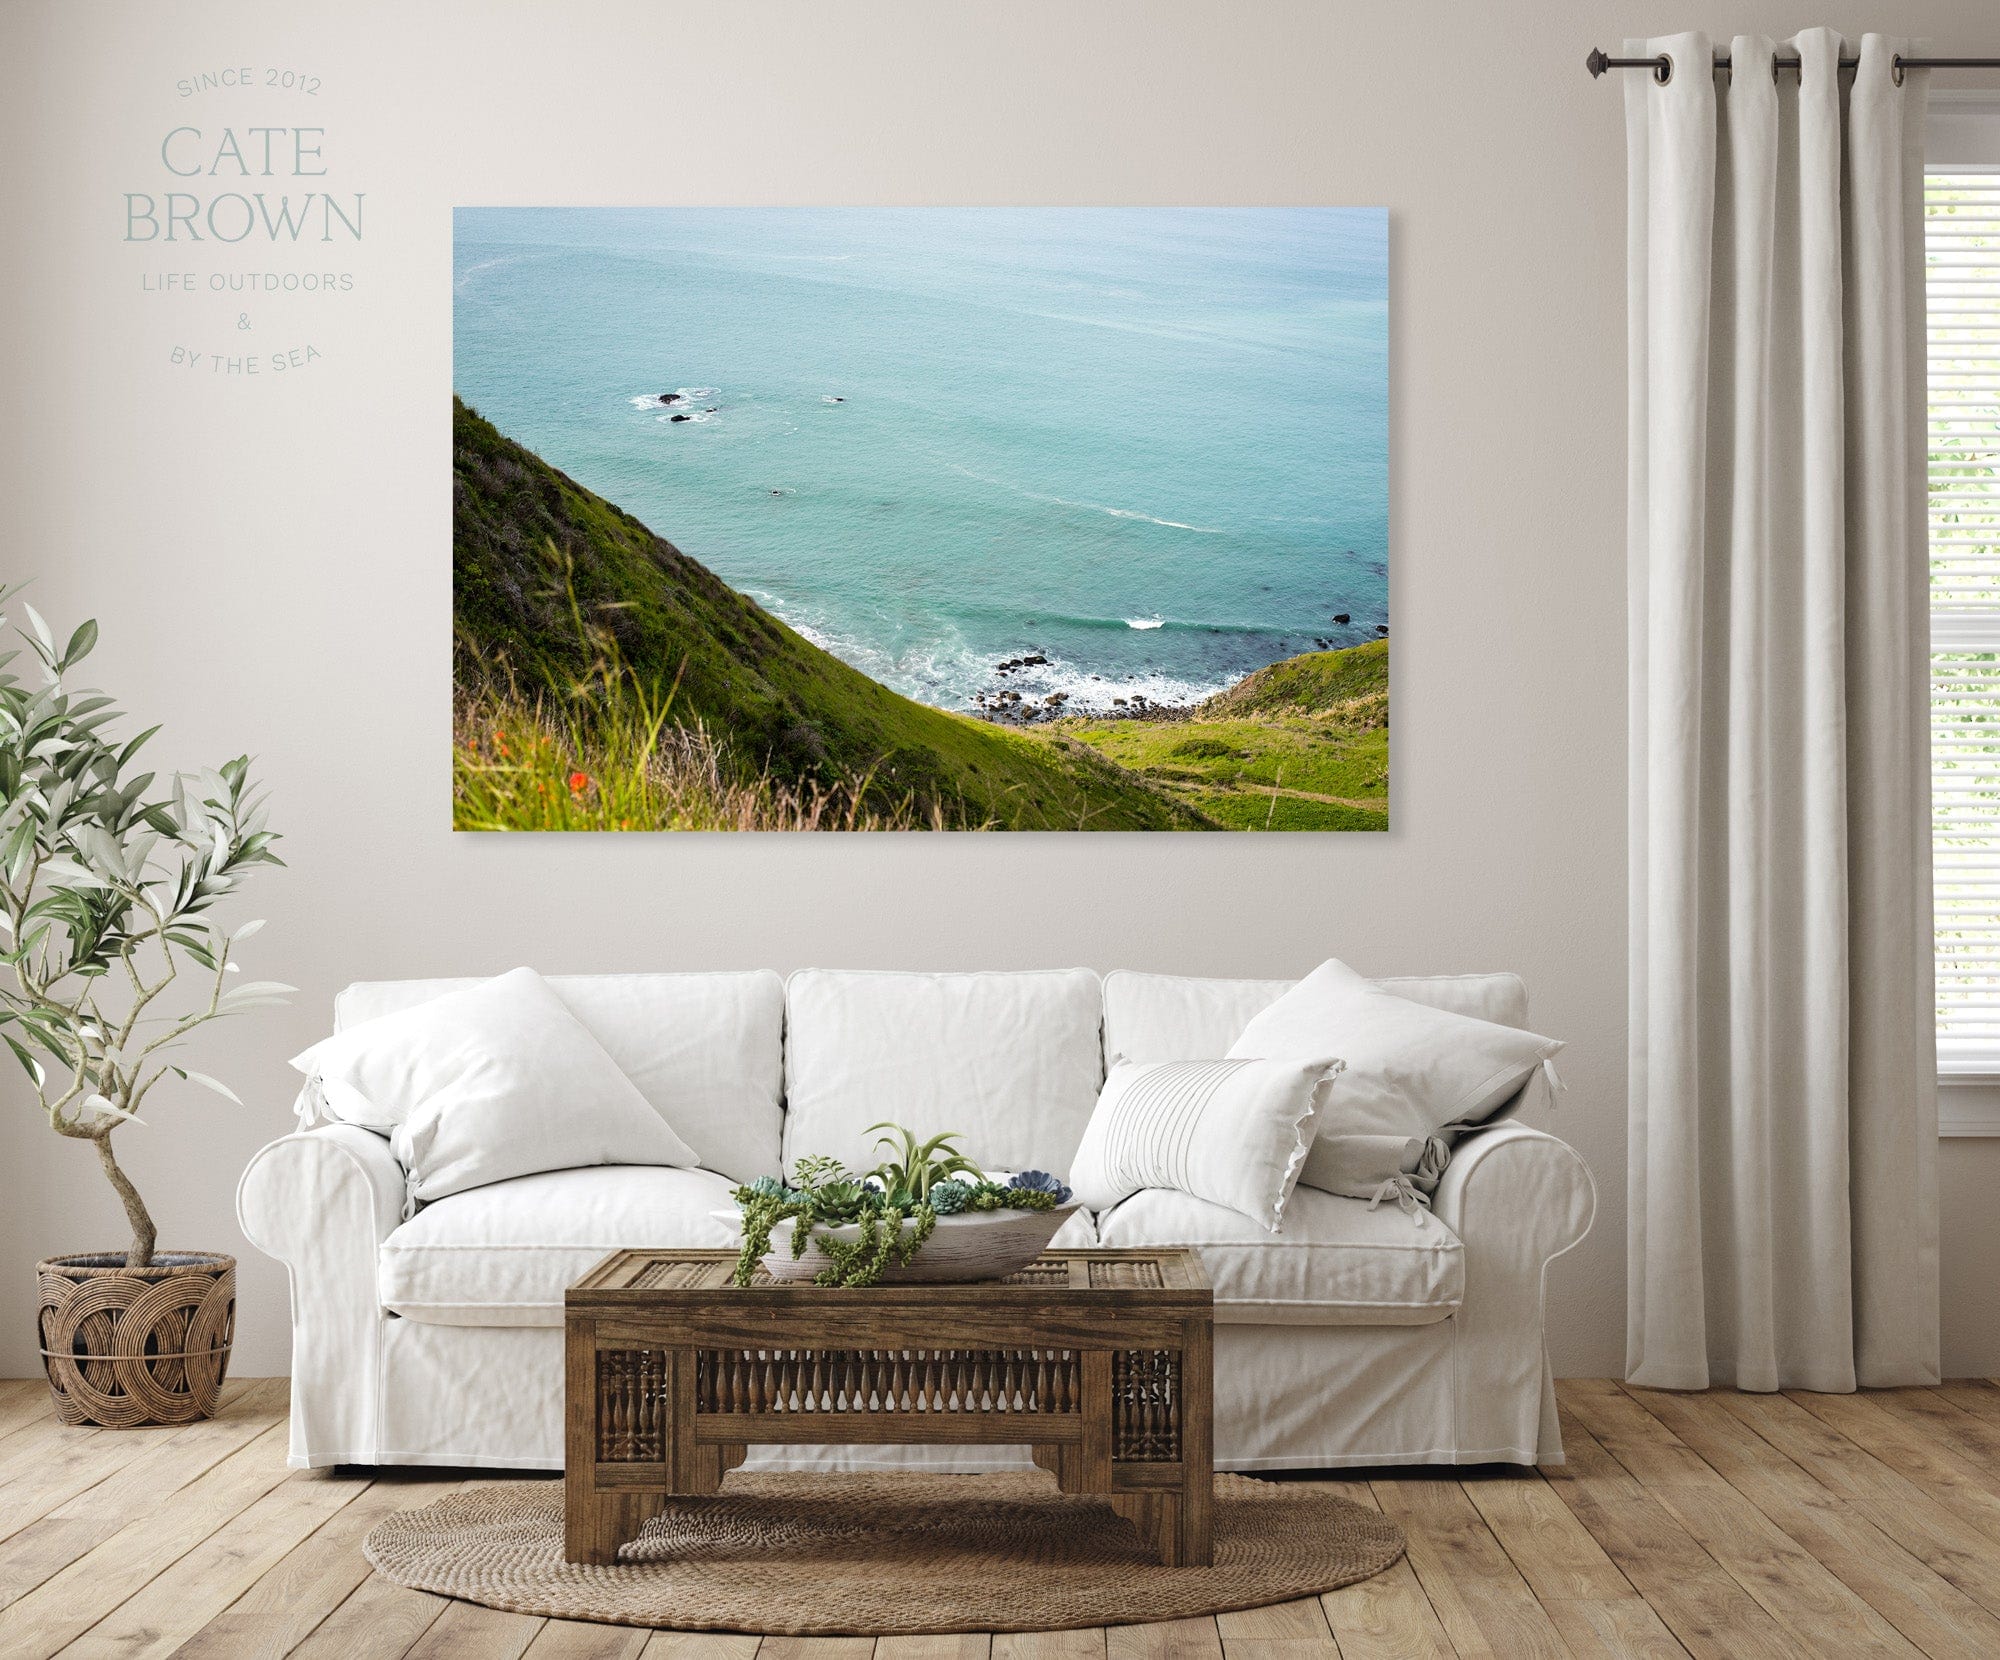 Cate Brown Photo Canvas / 16"x24" / None (Print Only) Sonoma Coast Highway  //  Landscape Photography Made to Order Ocean Fine Art